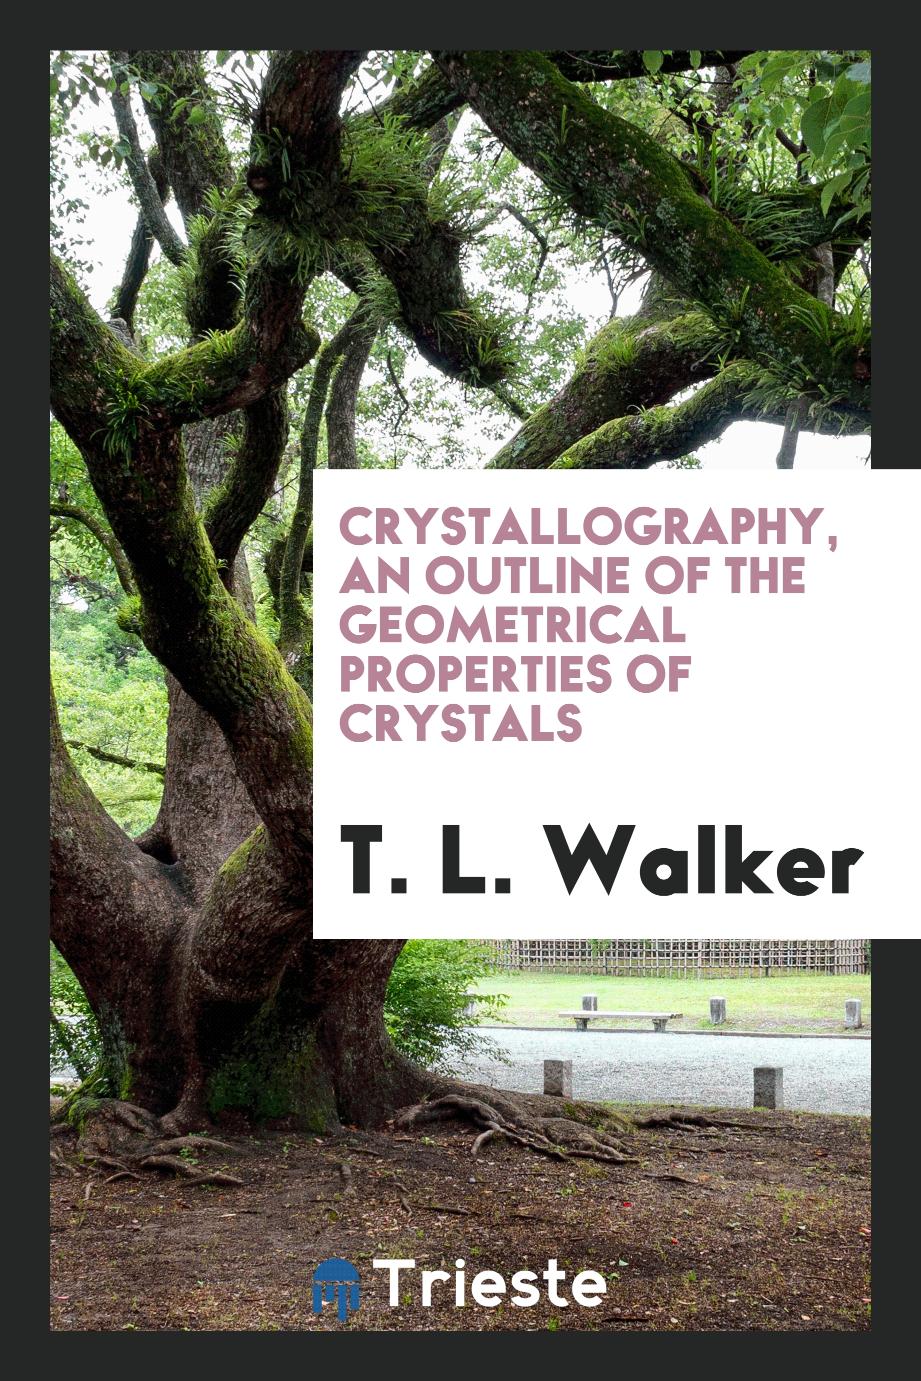 Crystallography, an outline of the geometrical properties of crystals